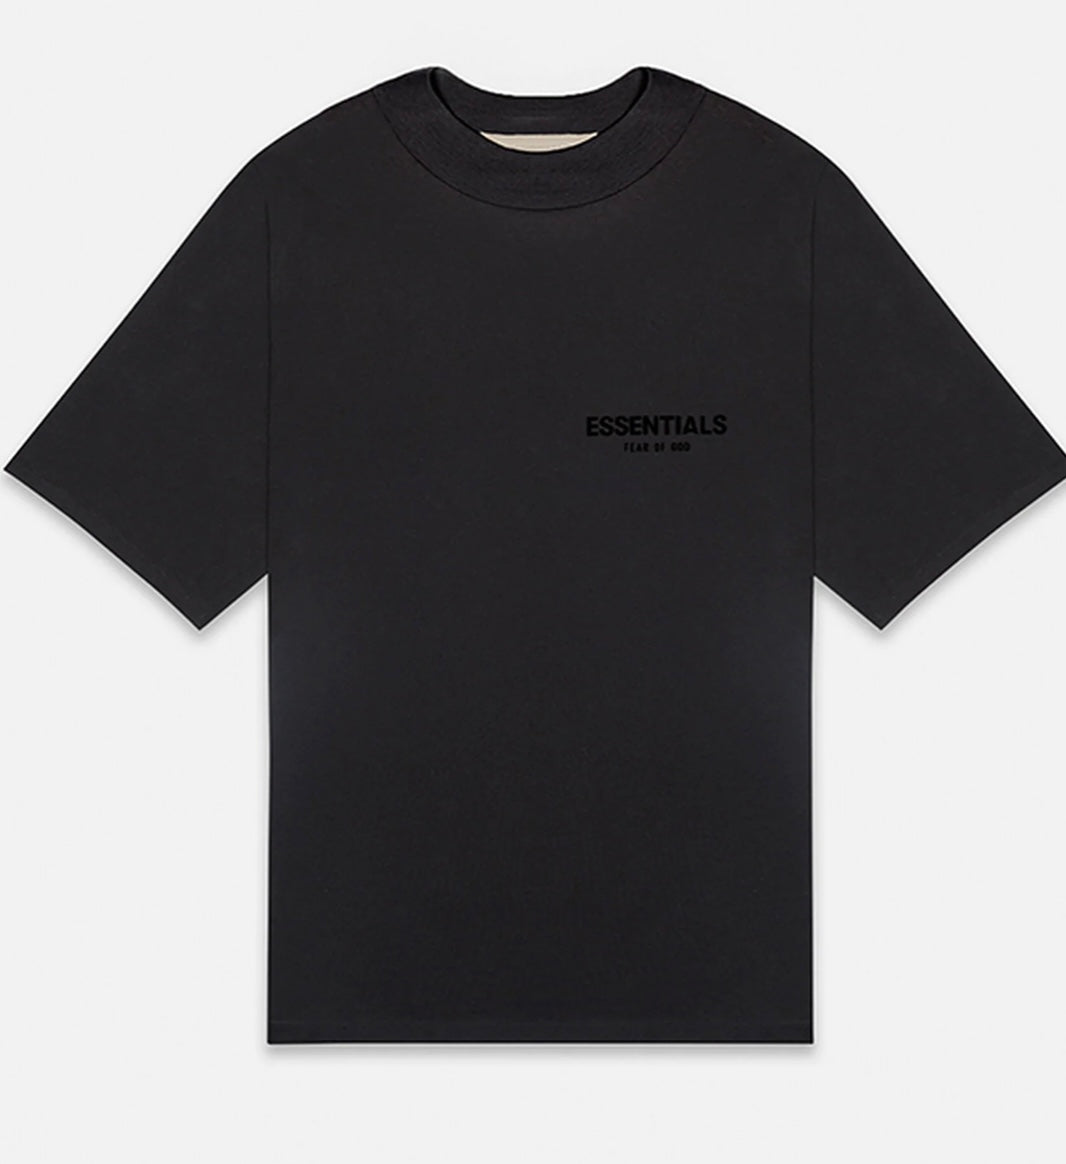 SS22 Essentials Fear Of God Stretch Limo T-Shirt